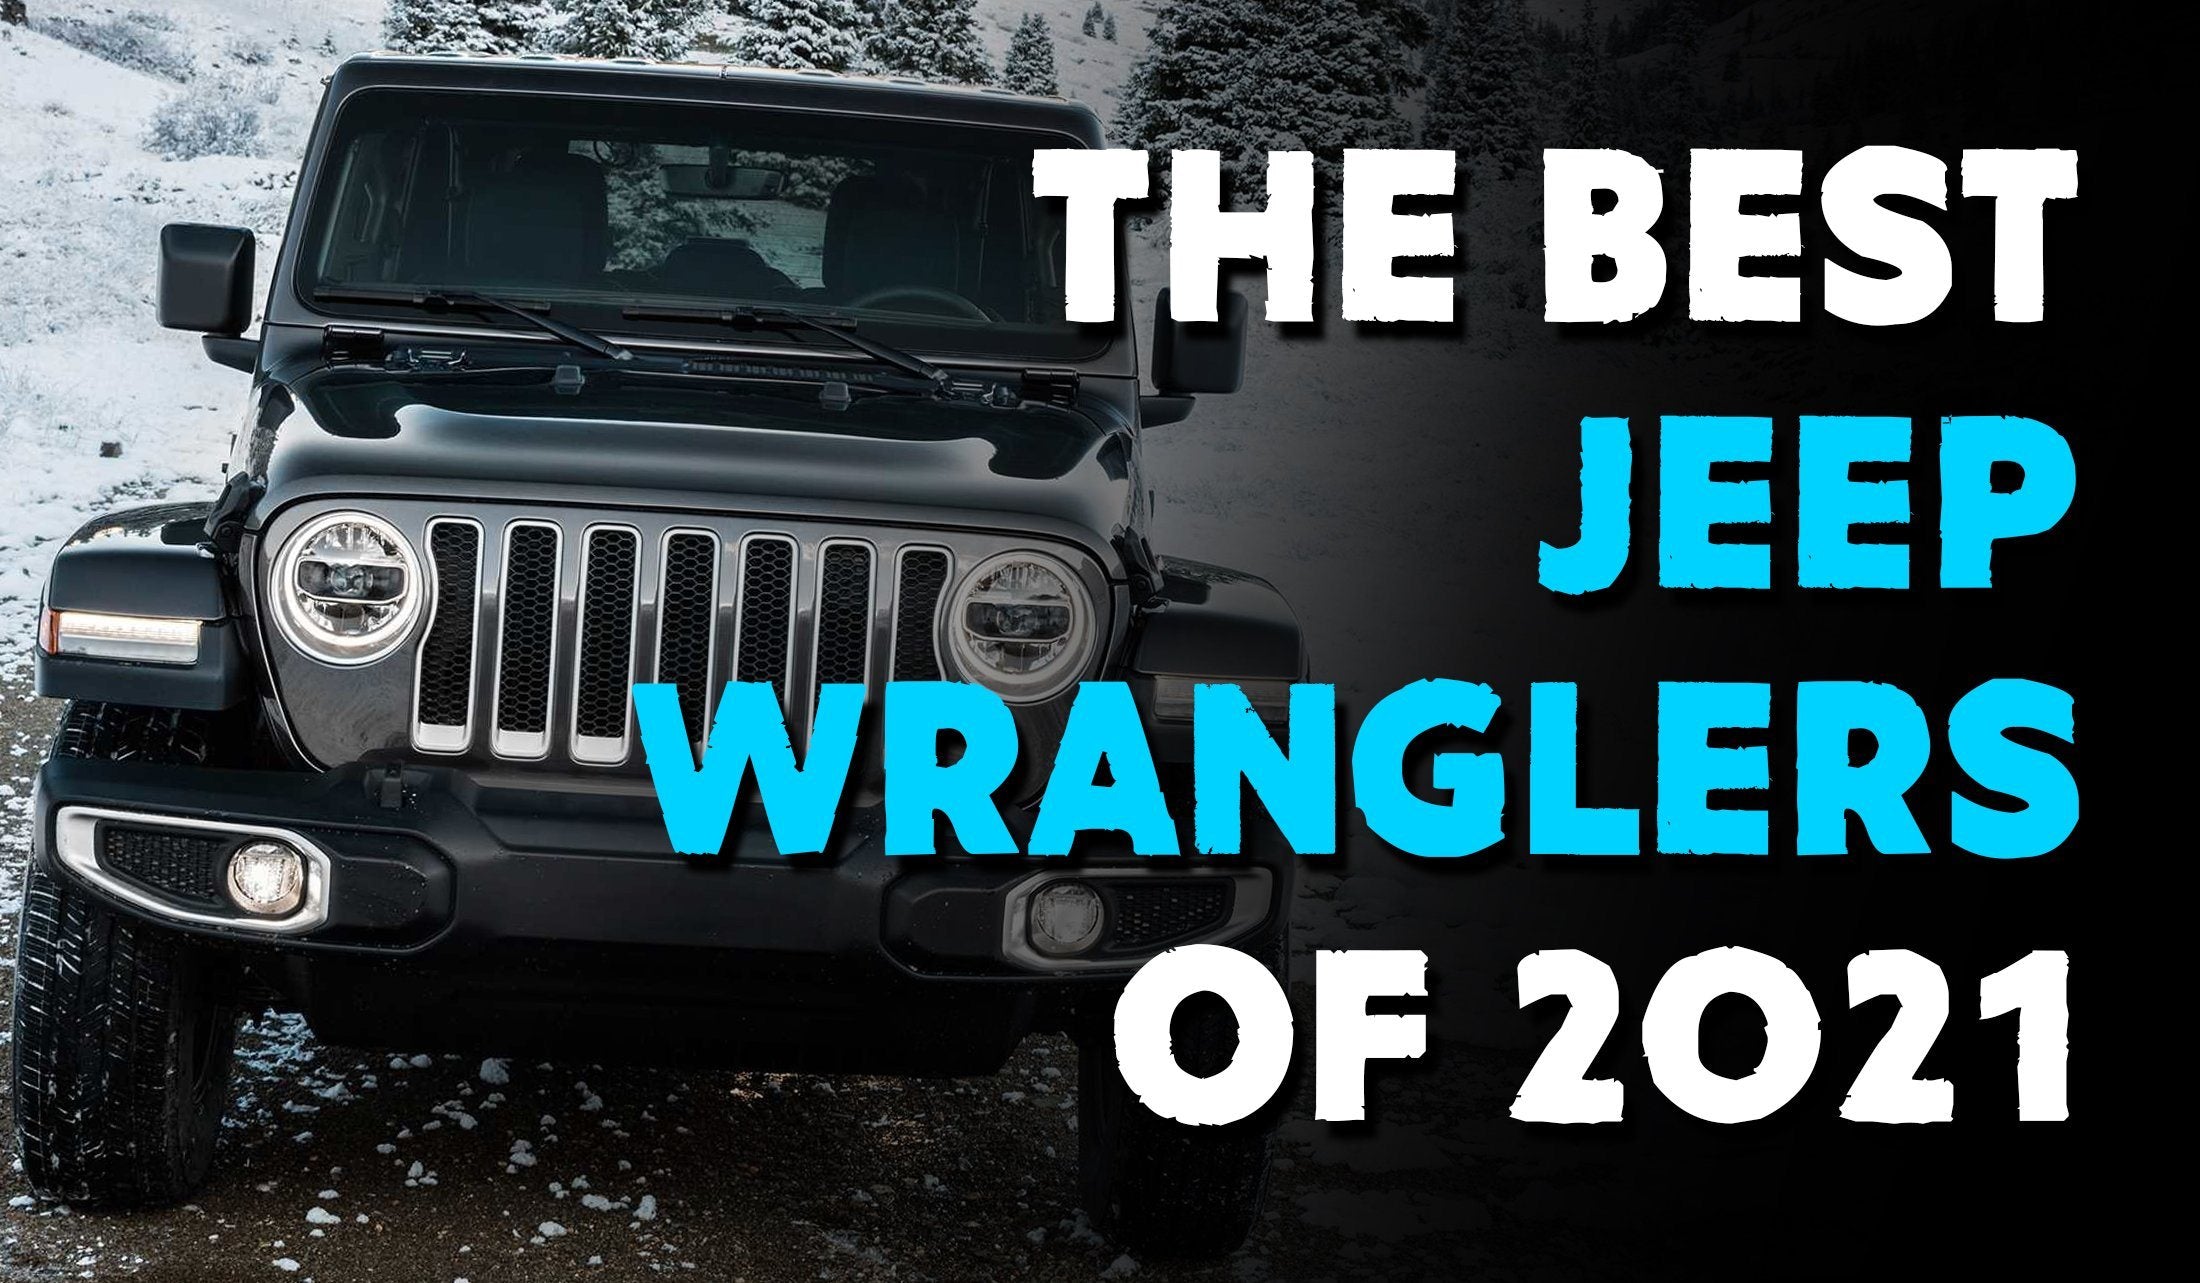 The Best Jeep Wranglers of 2021